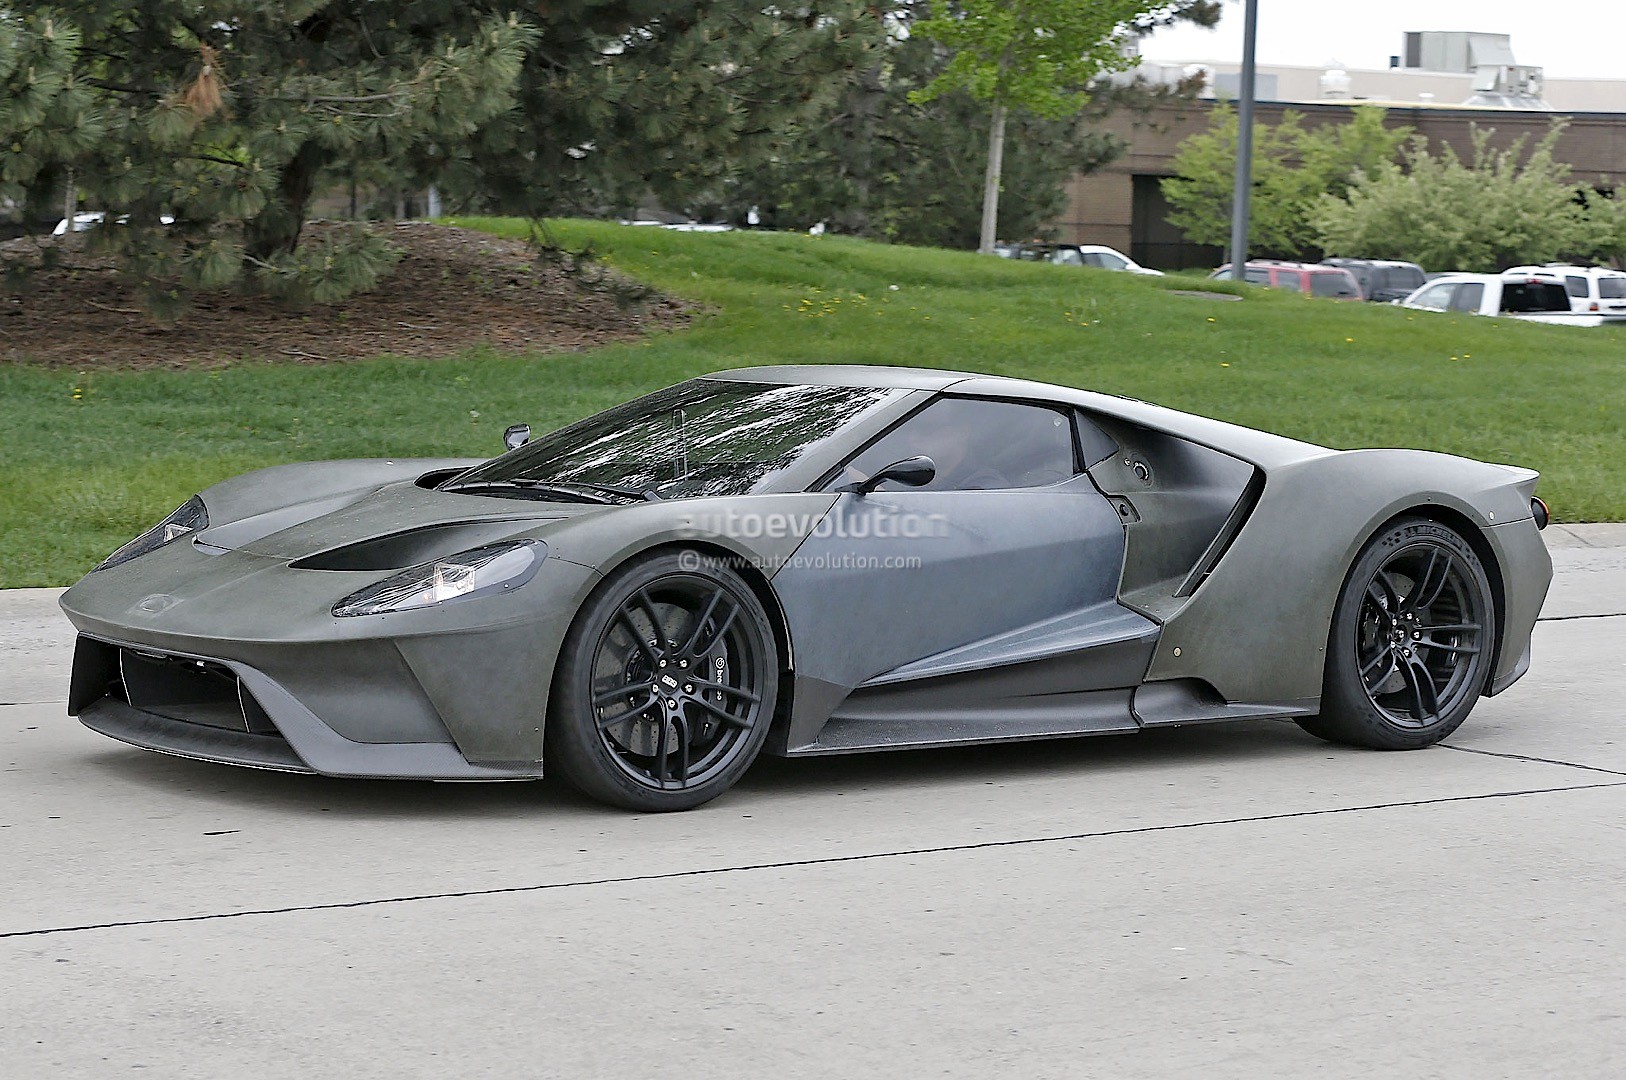 2017-ford-gt-test-mule-spied-looks-apocalyptic-sans-paint-photo-gallery_3.jpg